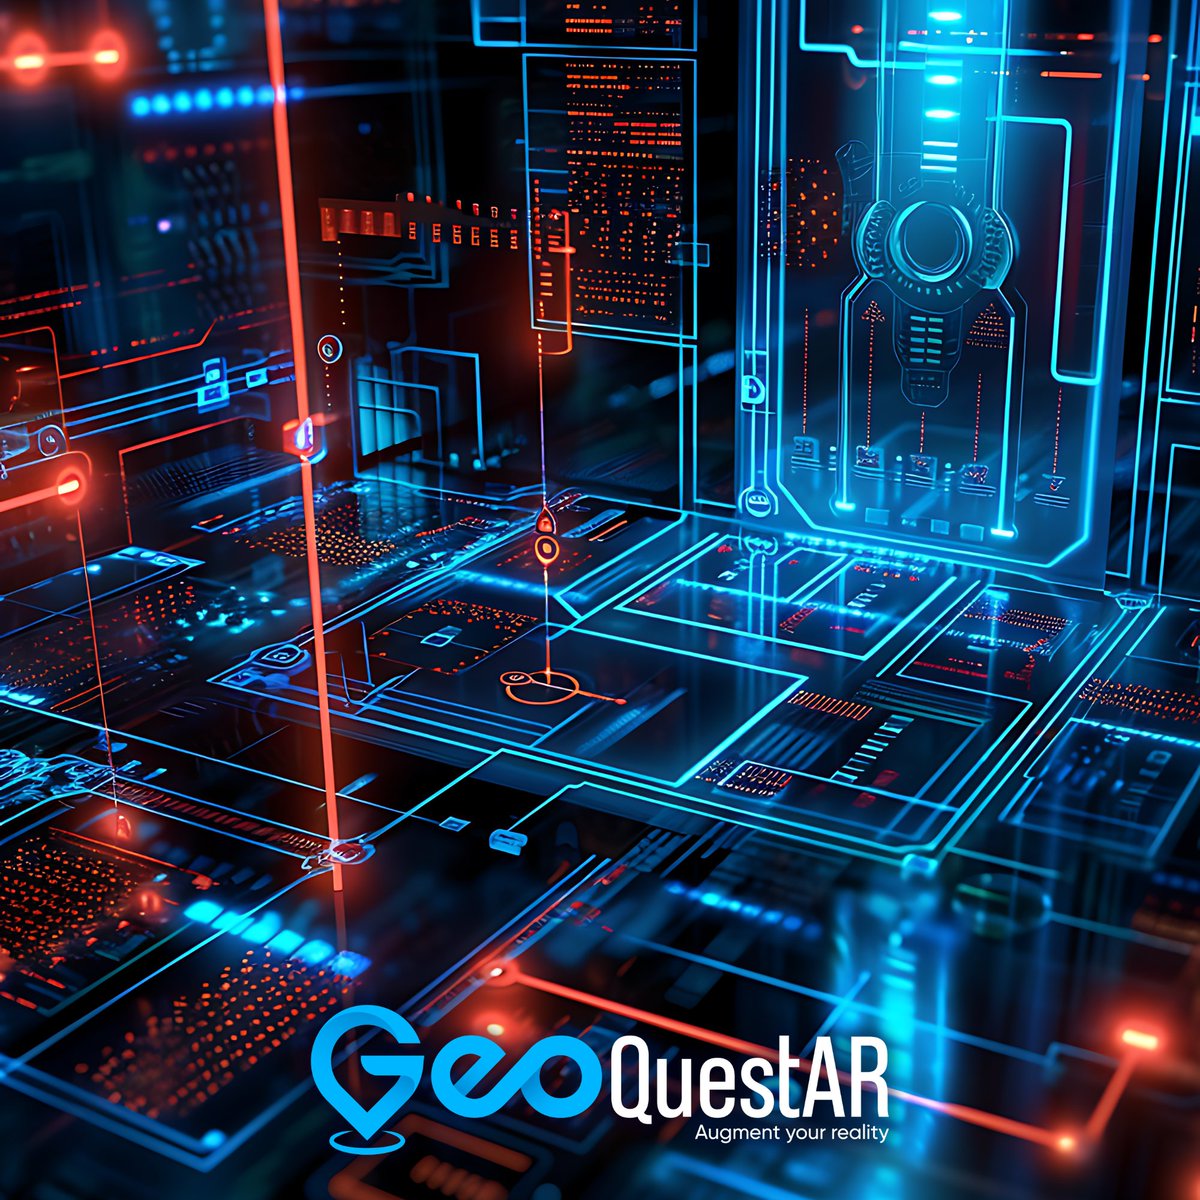 GeoQuest AR is an all-in-one augmented reality application. Using the latest AR technology, we take our users on a journey to a new reality. From treasure hunting, AR monster fighting and crafting to nft drops, crypto bounties and coupons for local businesses. GeoQuest AR